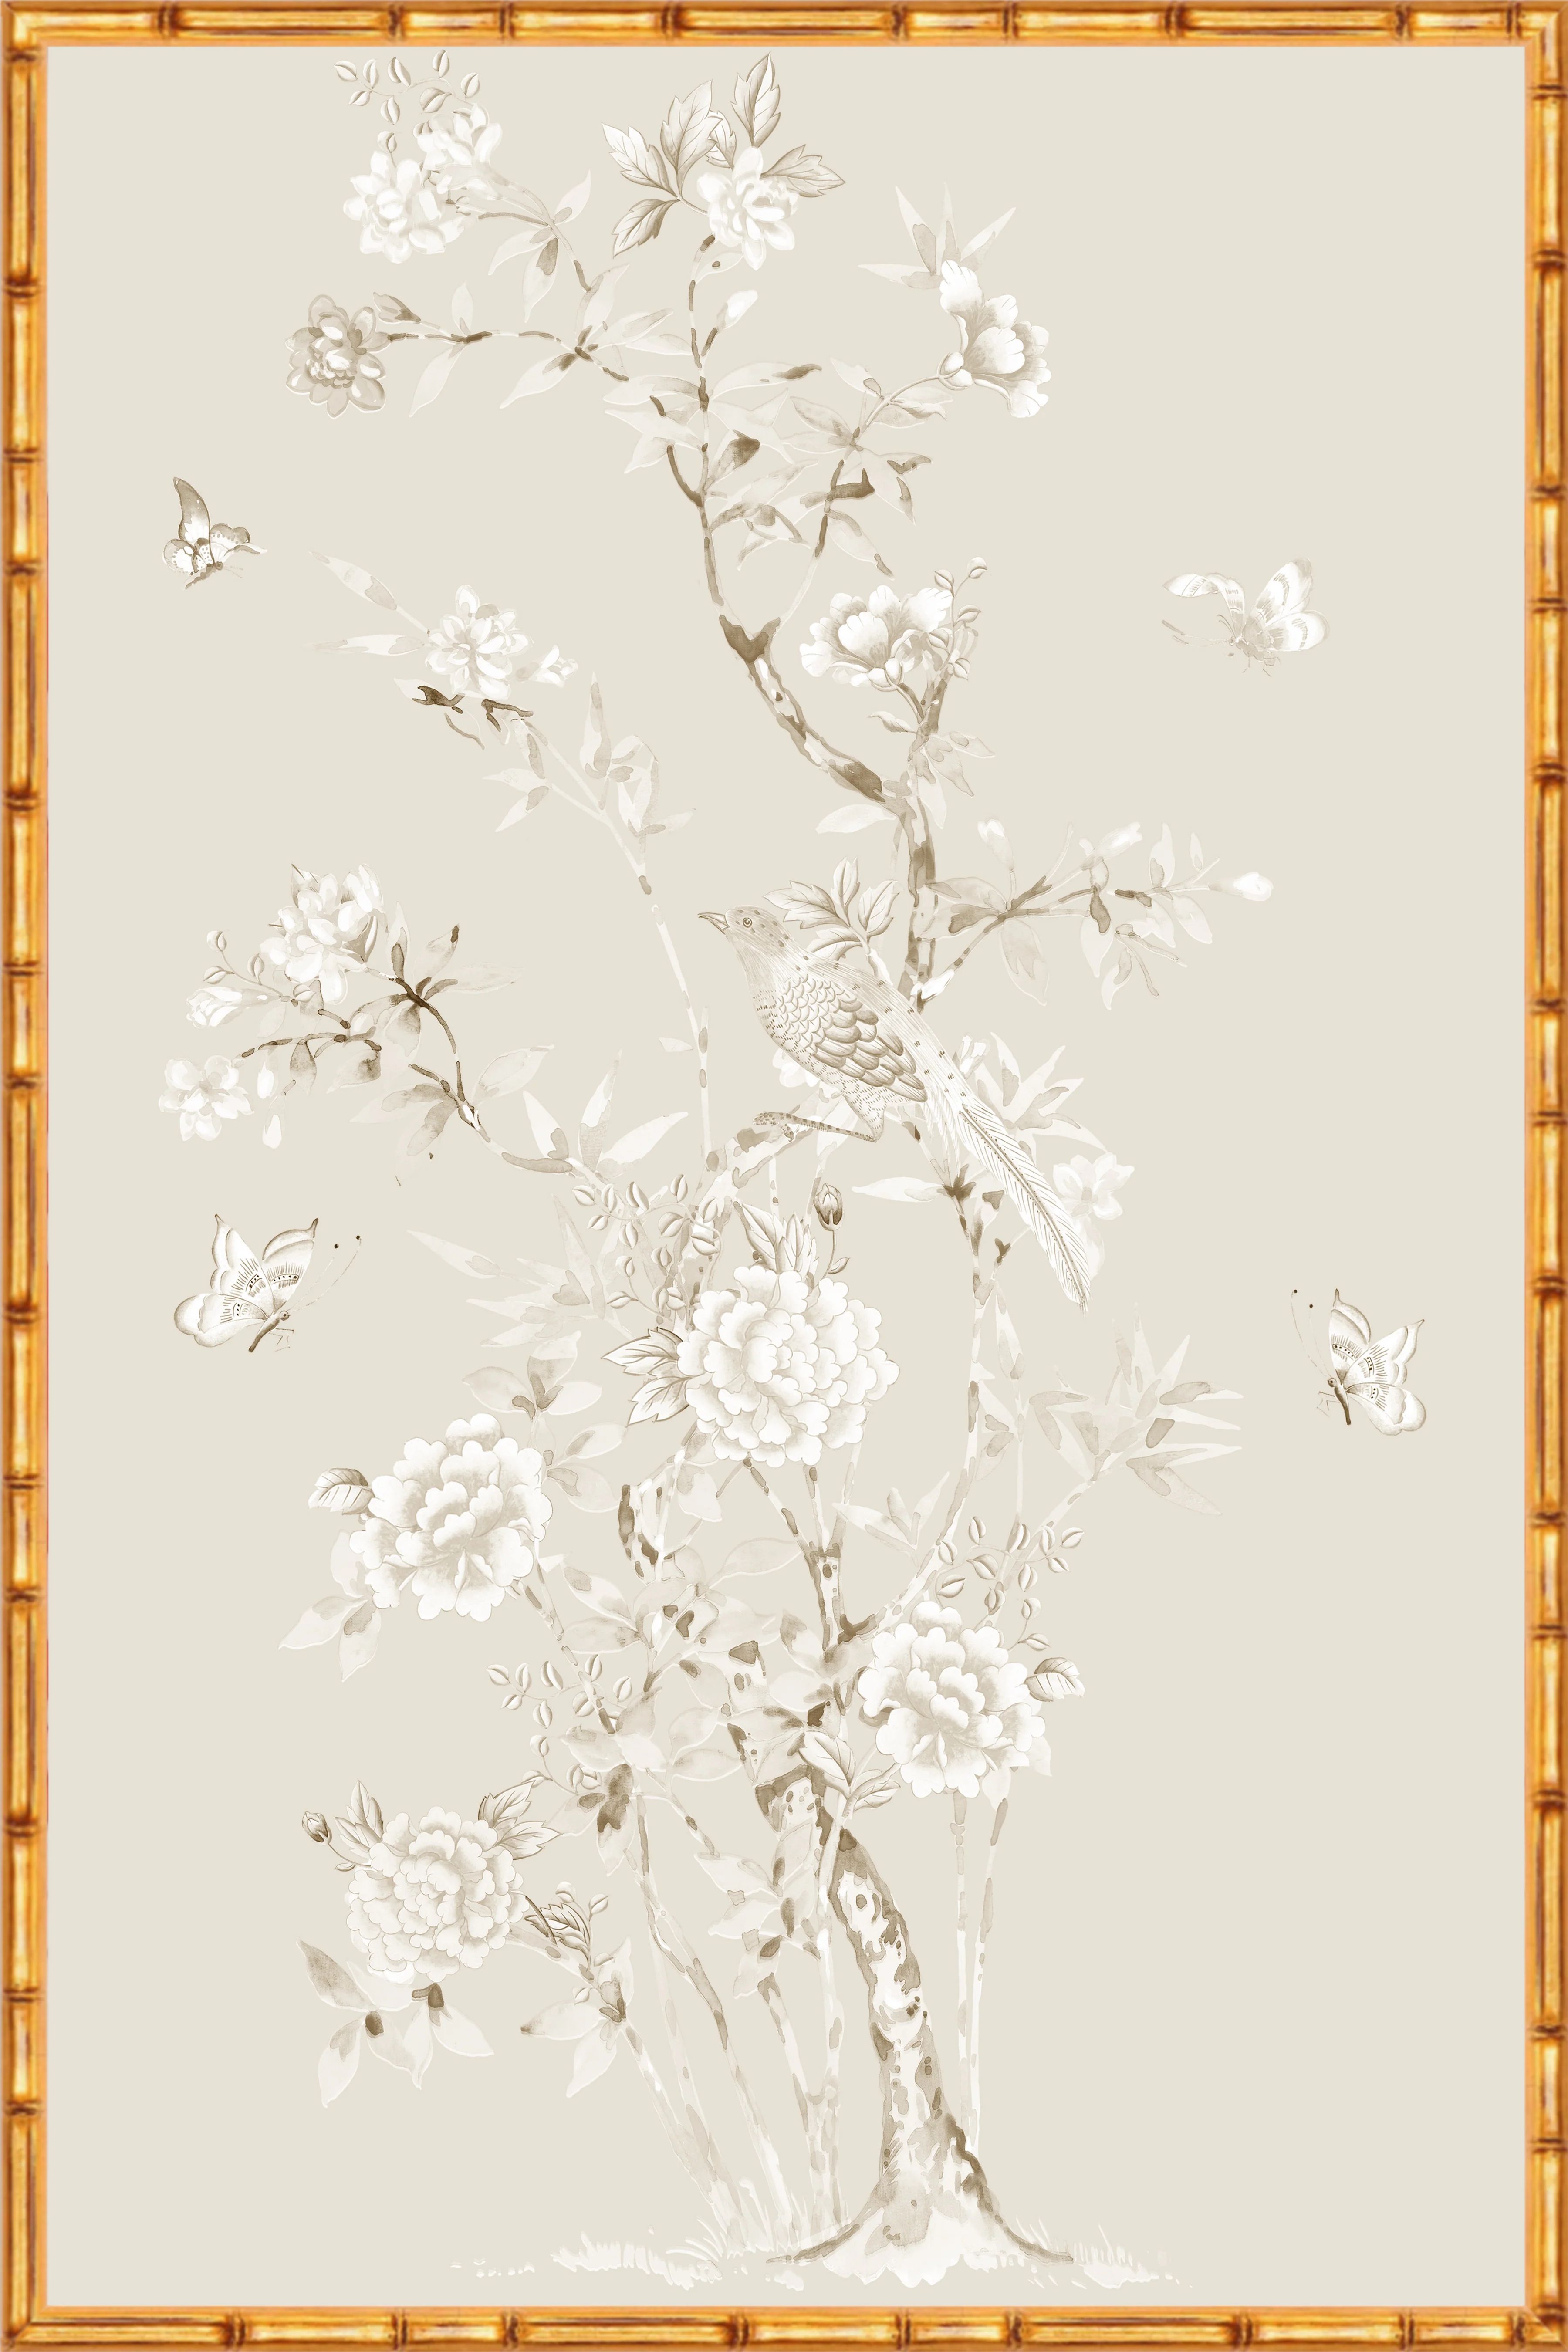 Monochrome "Chinoiserie Garden 1" Framed Panel in "Dune" by Lo Home X Tashi Tsering | Lo Home by Lauren Haskell Designs